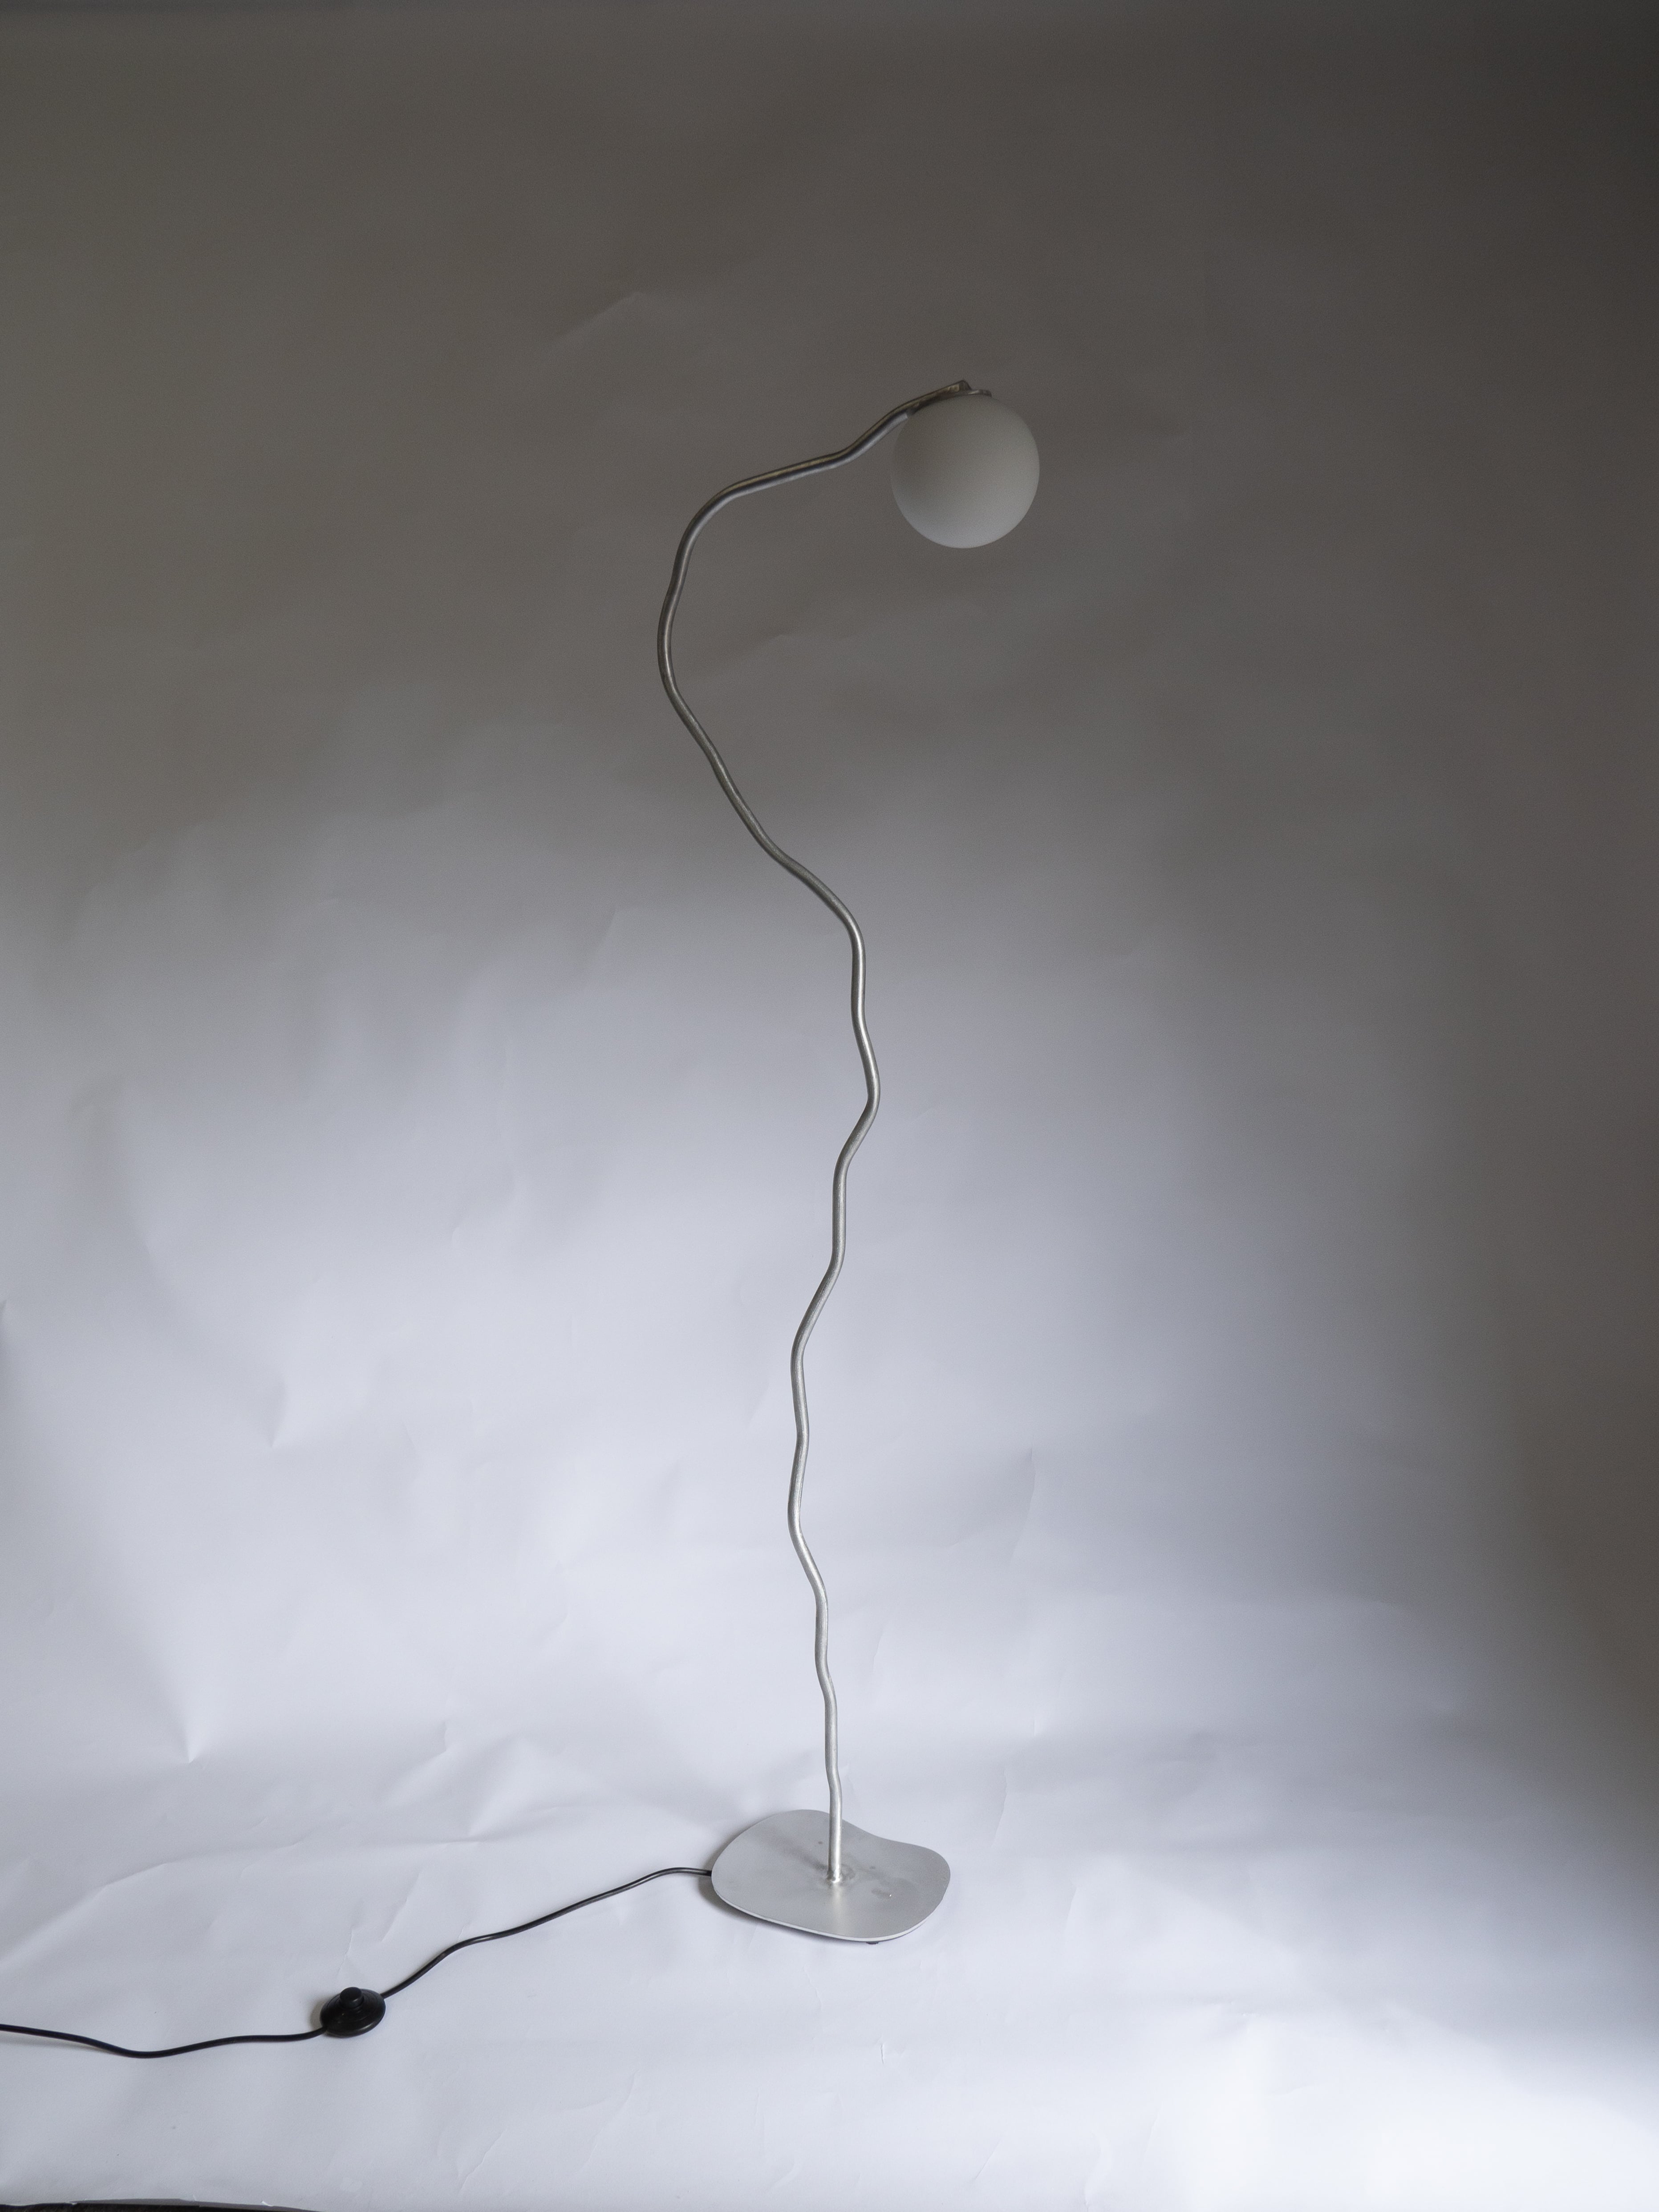 A modern, handcrafted floor lamp with a uniquely curved, wavy silver stand and a spherical white lampshade at the top. It stands on a stable, flat base and has a black power cord extending from the base. The Six Dots Design Pea Head Floor Lamp sits against a plain, light-colored surface, adding natural ambience to any room.